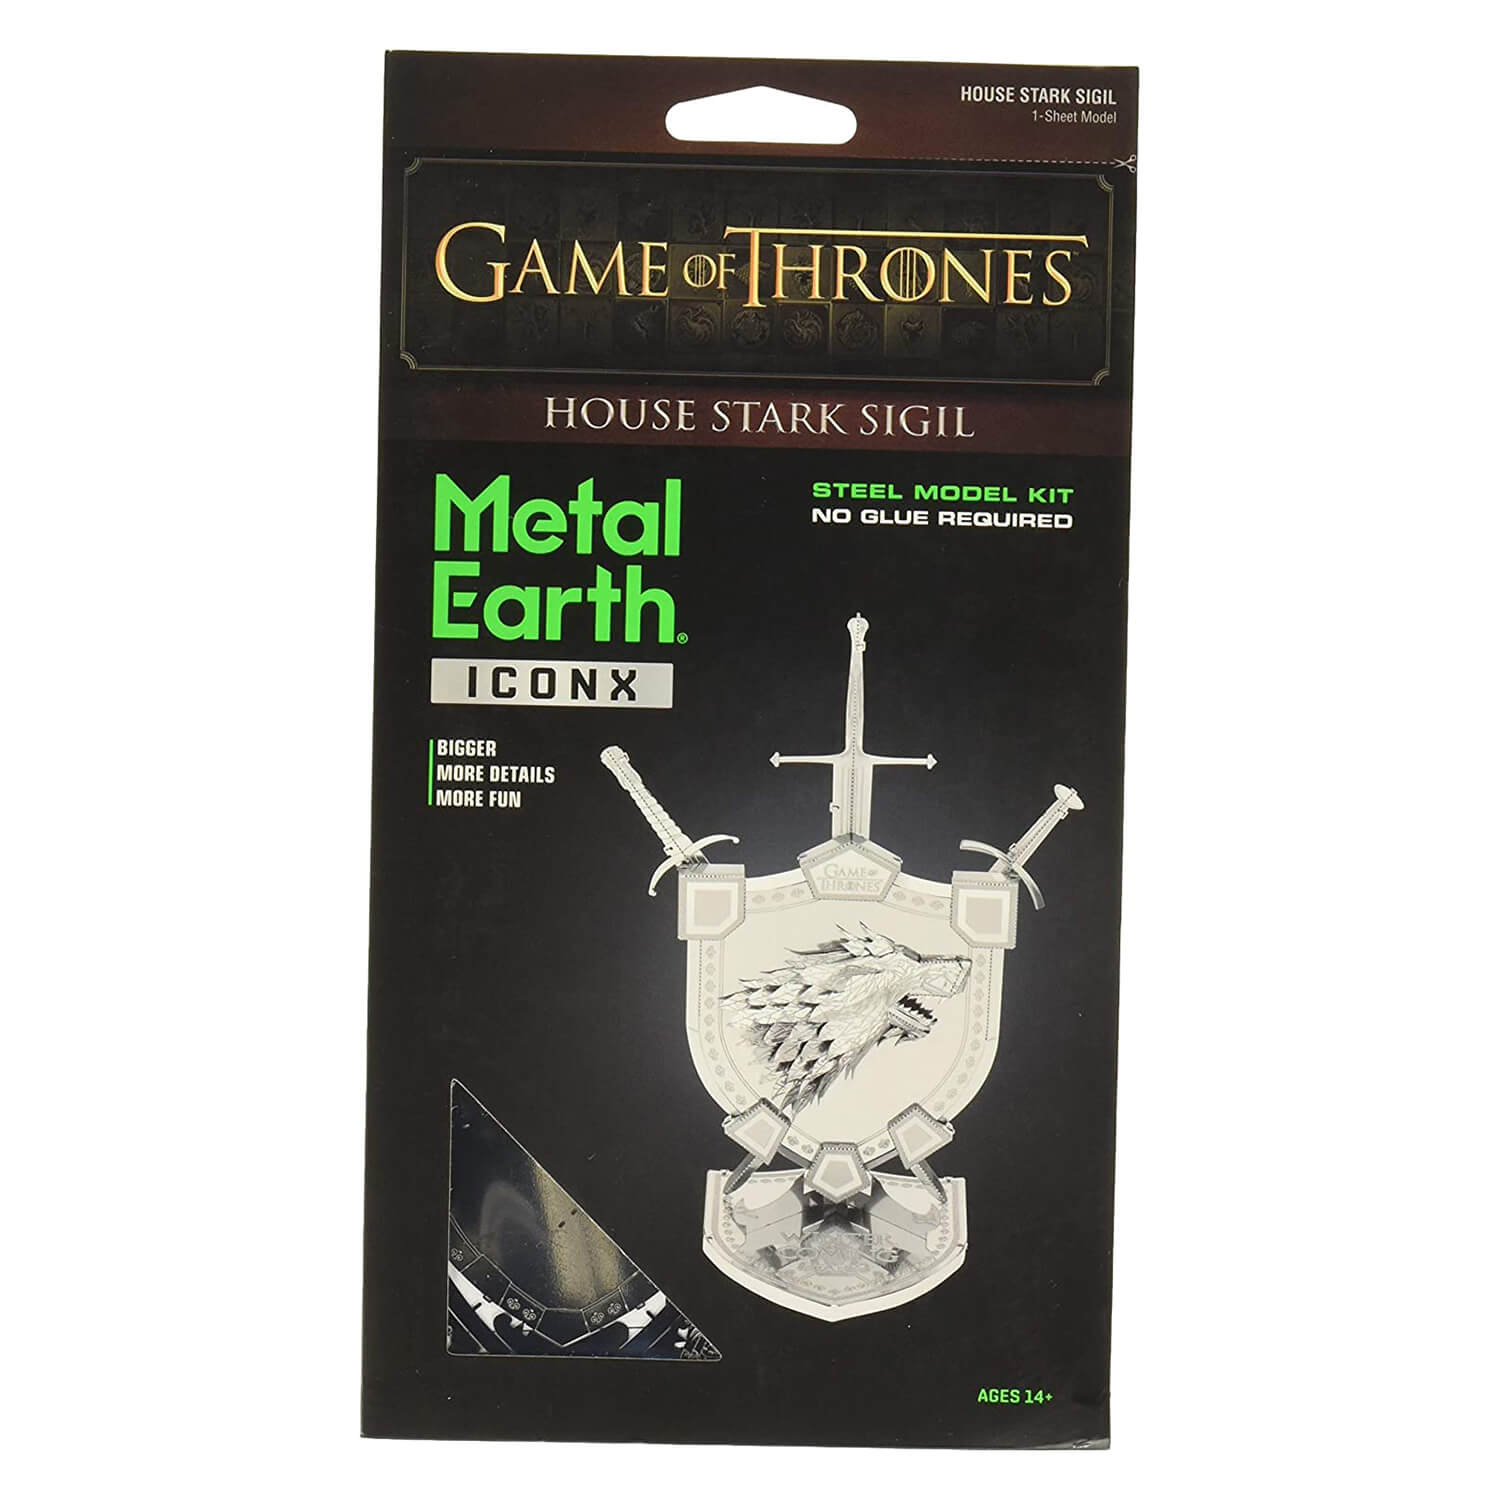 Front view of the Metal Earth Iconx Game of Thrones House Stark Sigil packaging.